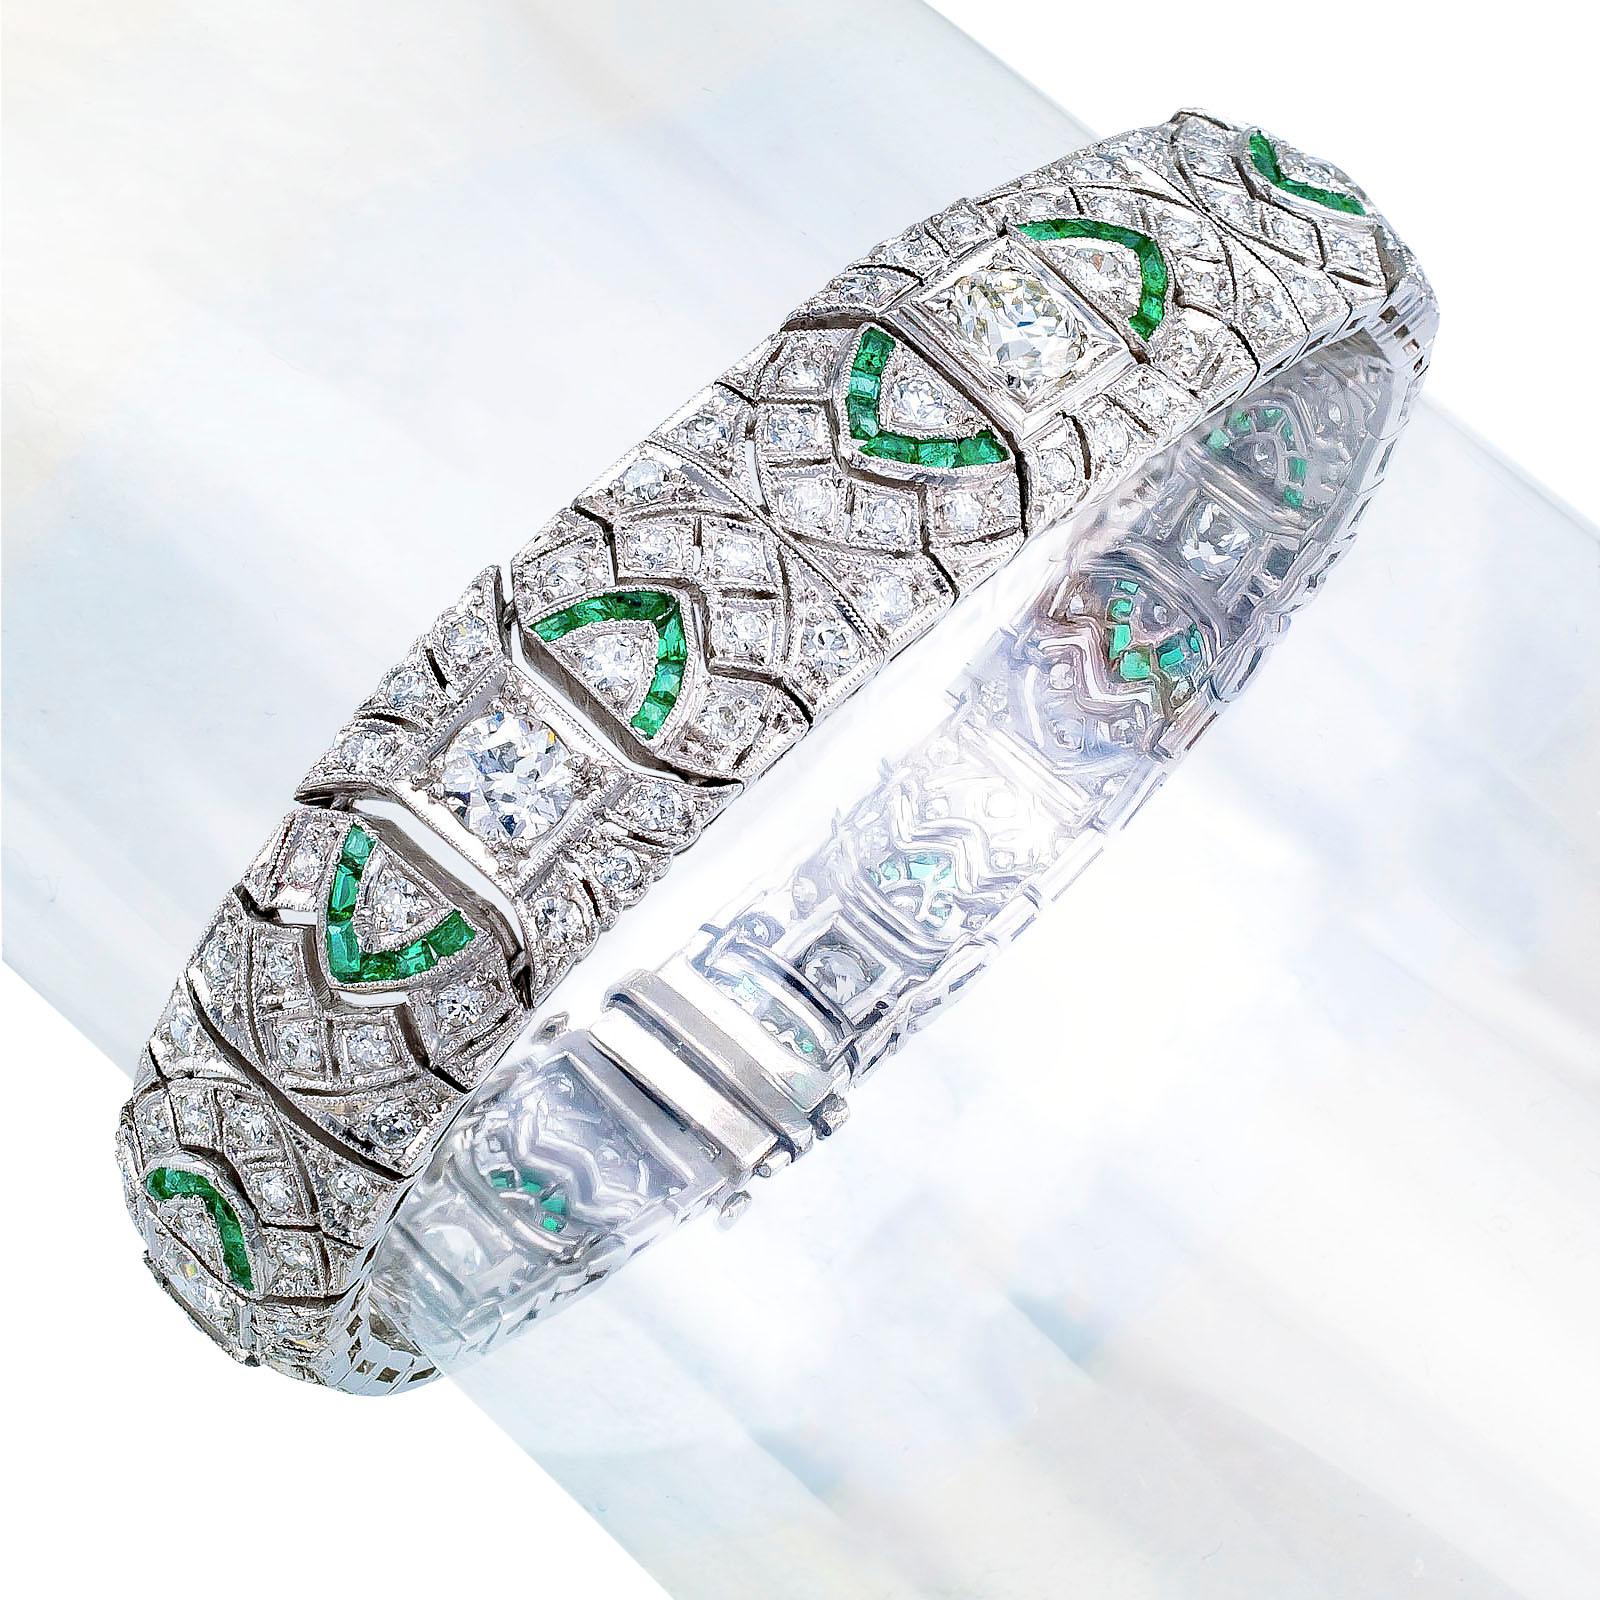 Art Deco diamond emerald and platinum bracelet circa 1925.

DETAILS:
DIAMONDS: one hundred fifty-three old-cut round diamonds totaling approximately 7.00 carats, approximately H – K color, VS – SI clarity.

GEMSTONES: eighty-four calibrated